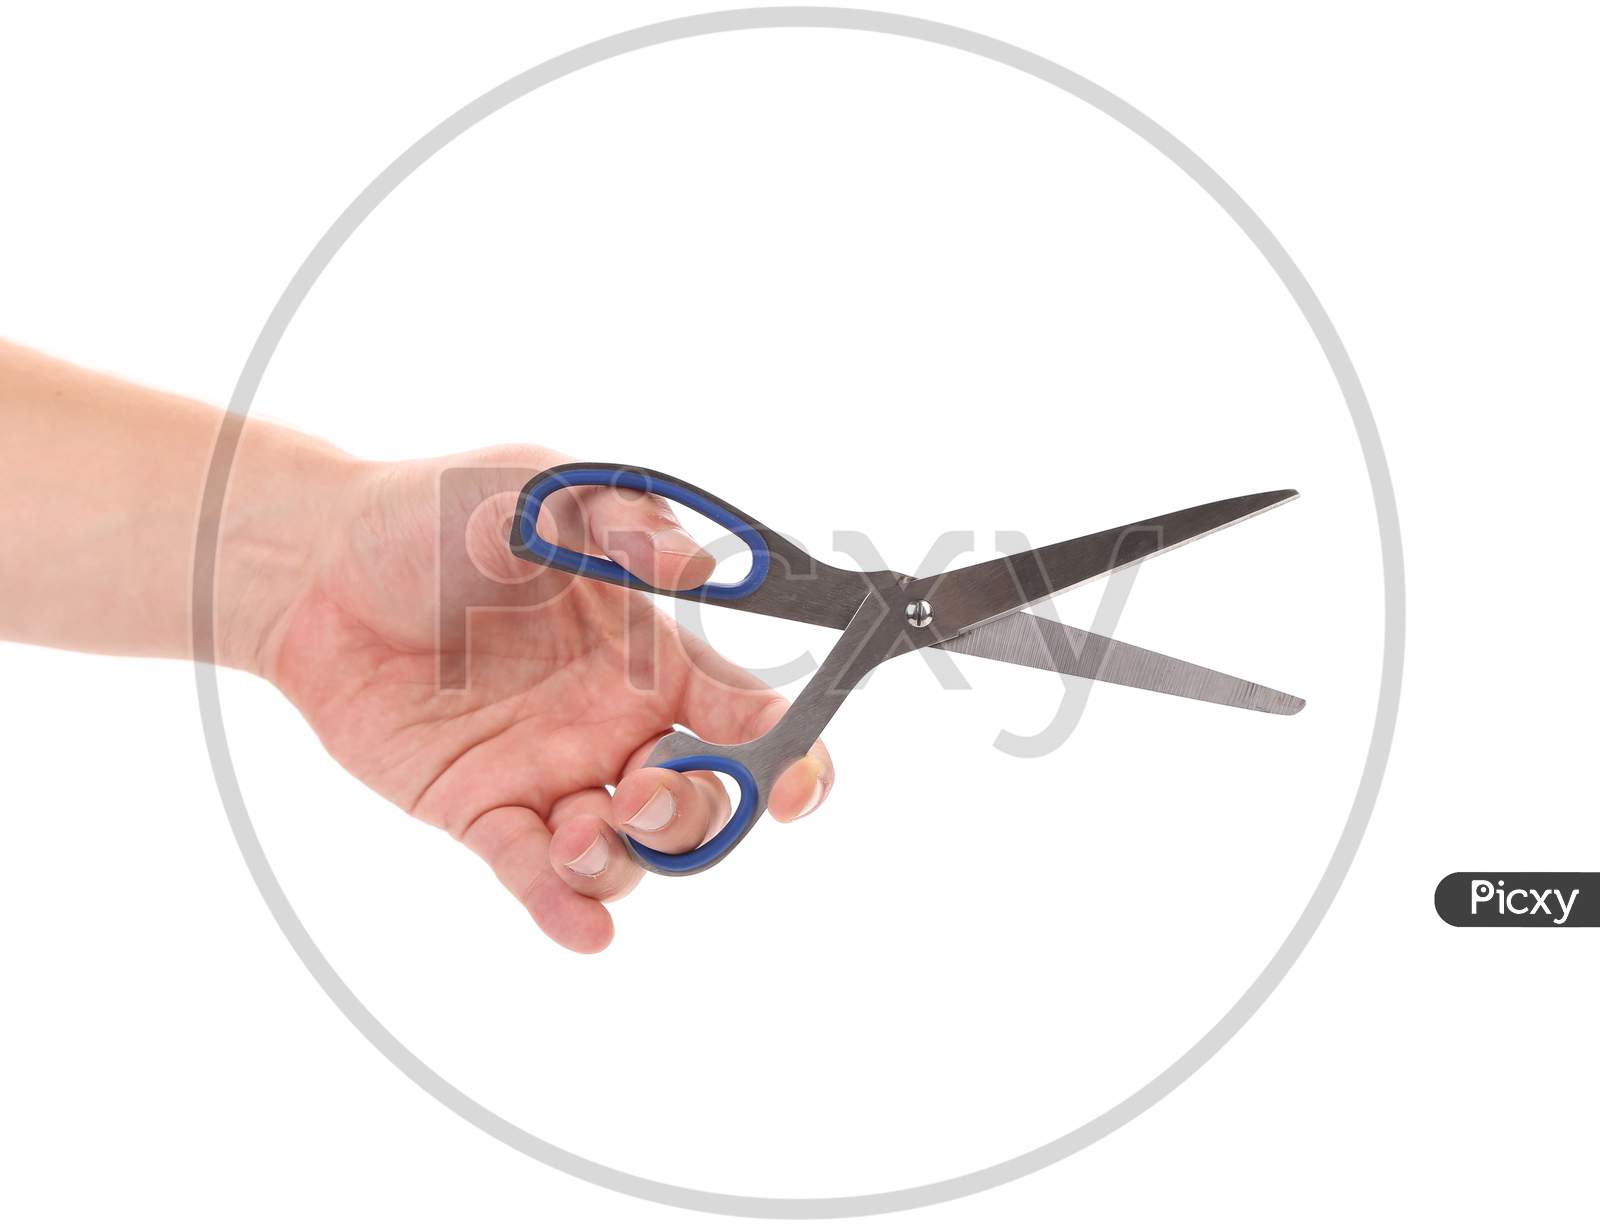 Male Hand Holding Scissors. Isolated On White Background.